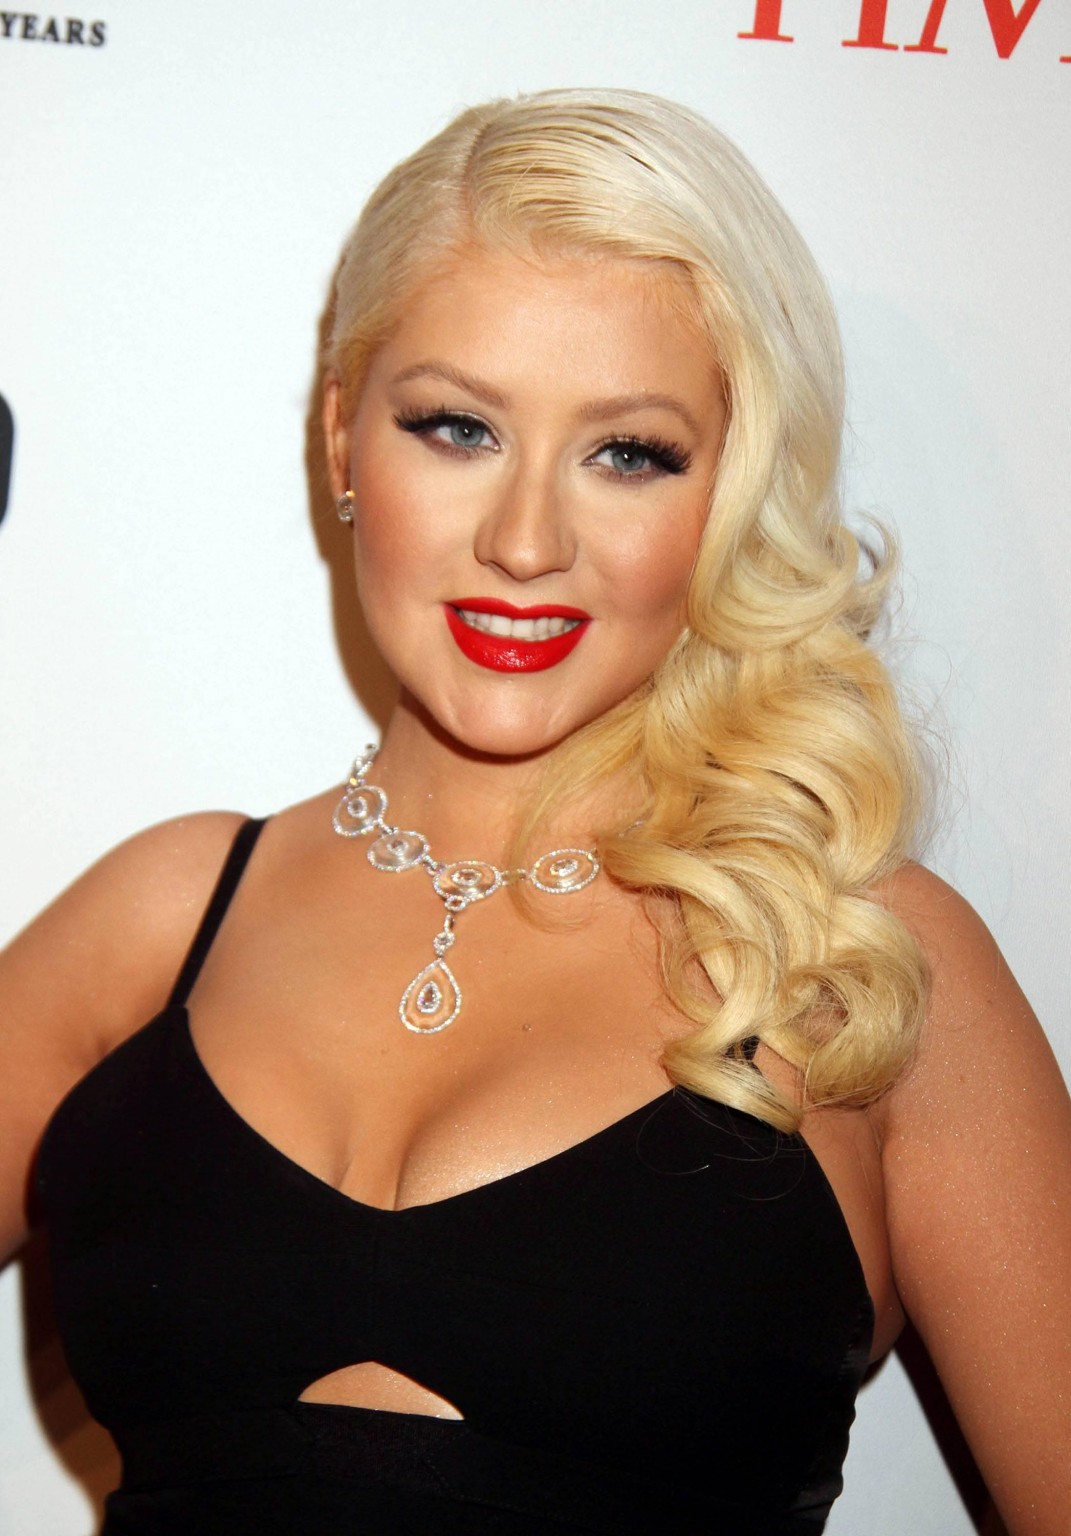 Christina Aguilera showing cleavage at the Time 100 Gala in New York City #75234080